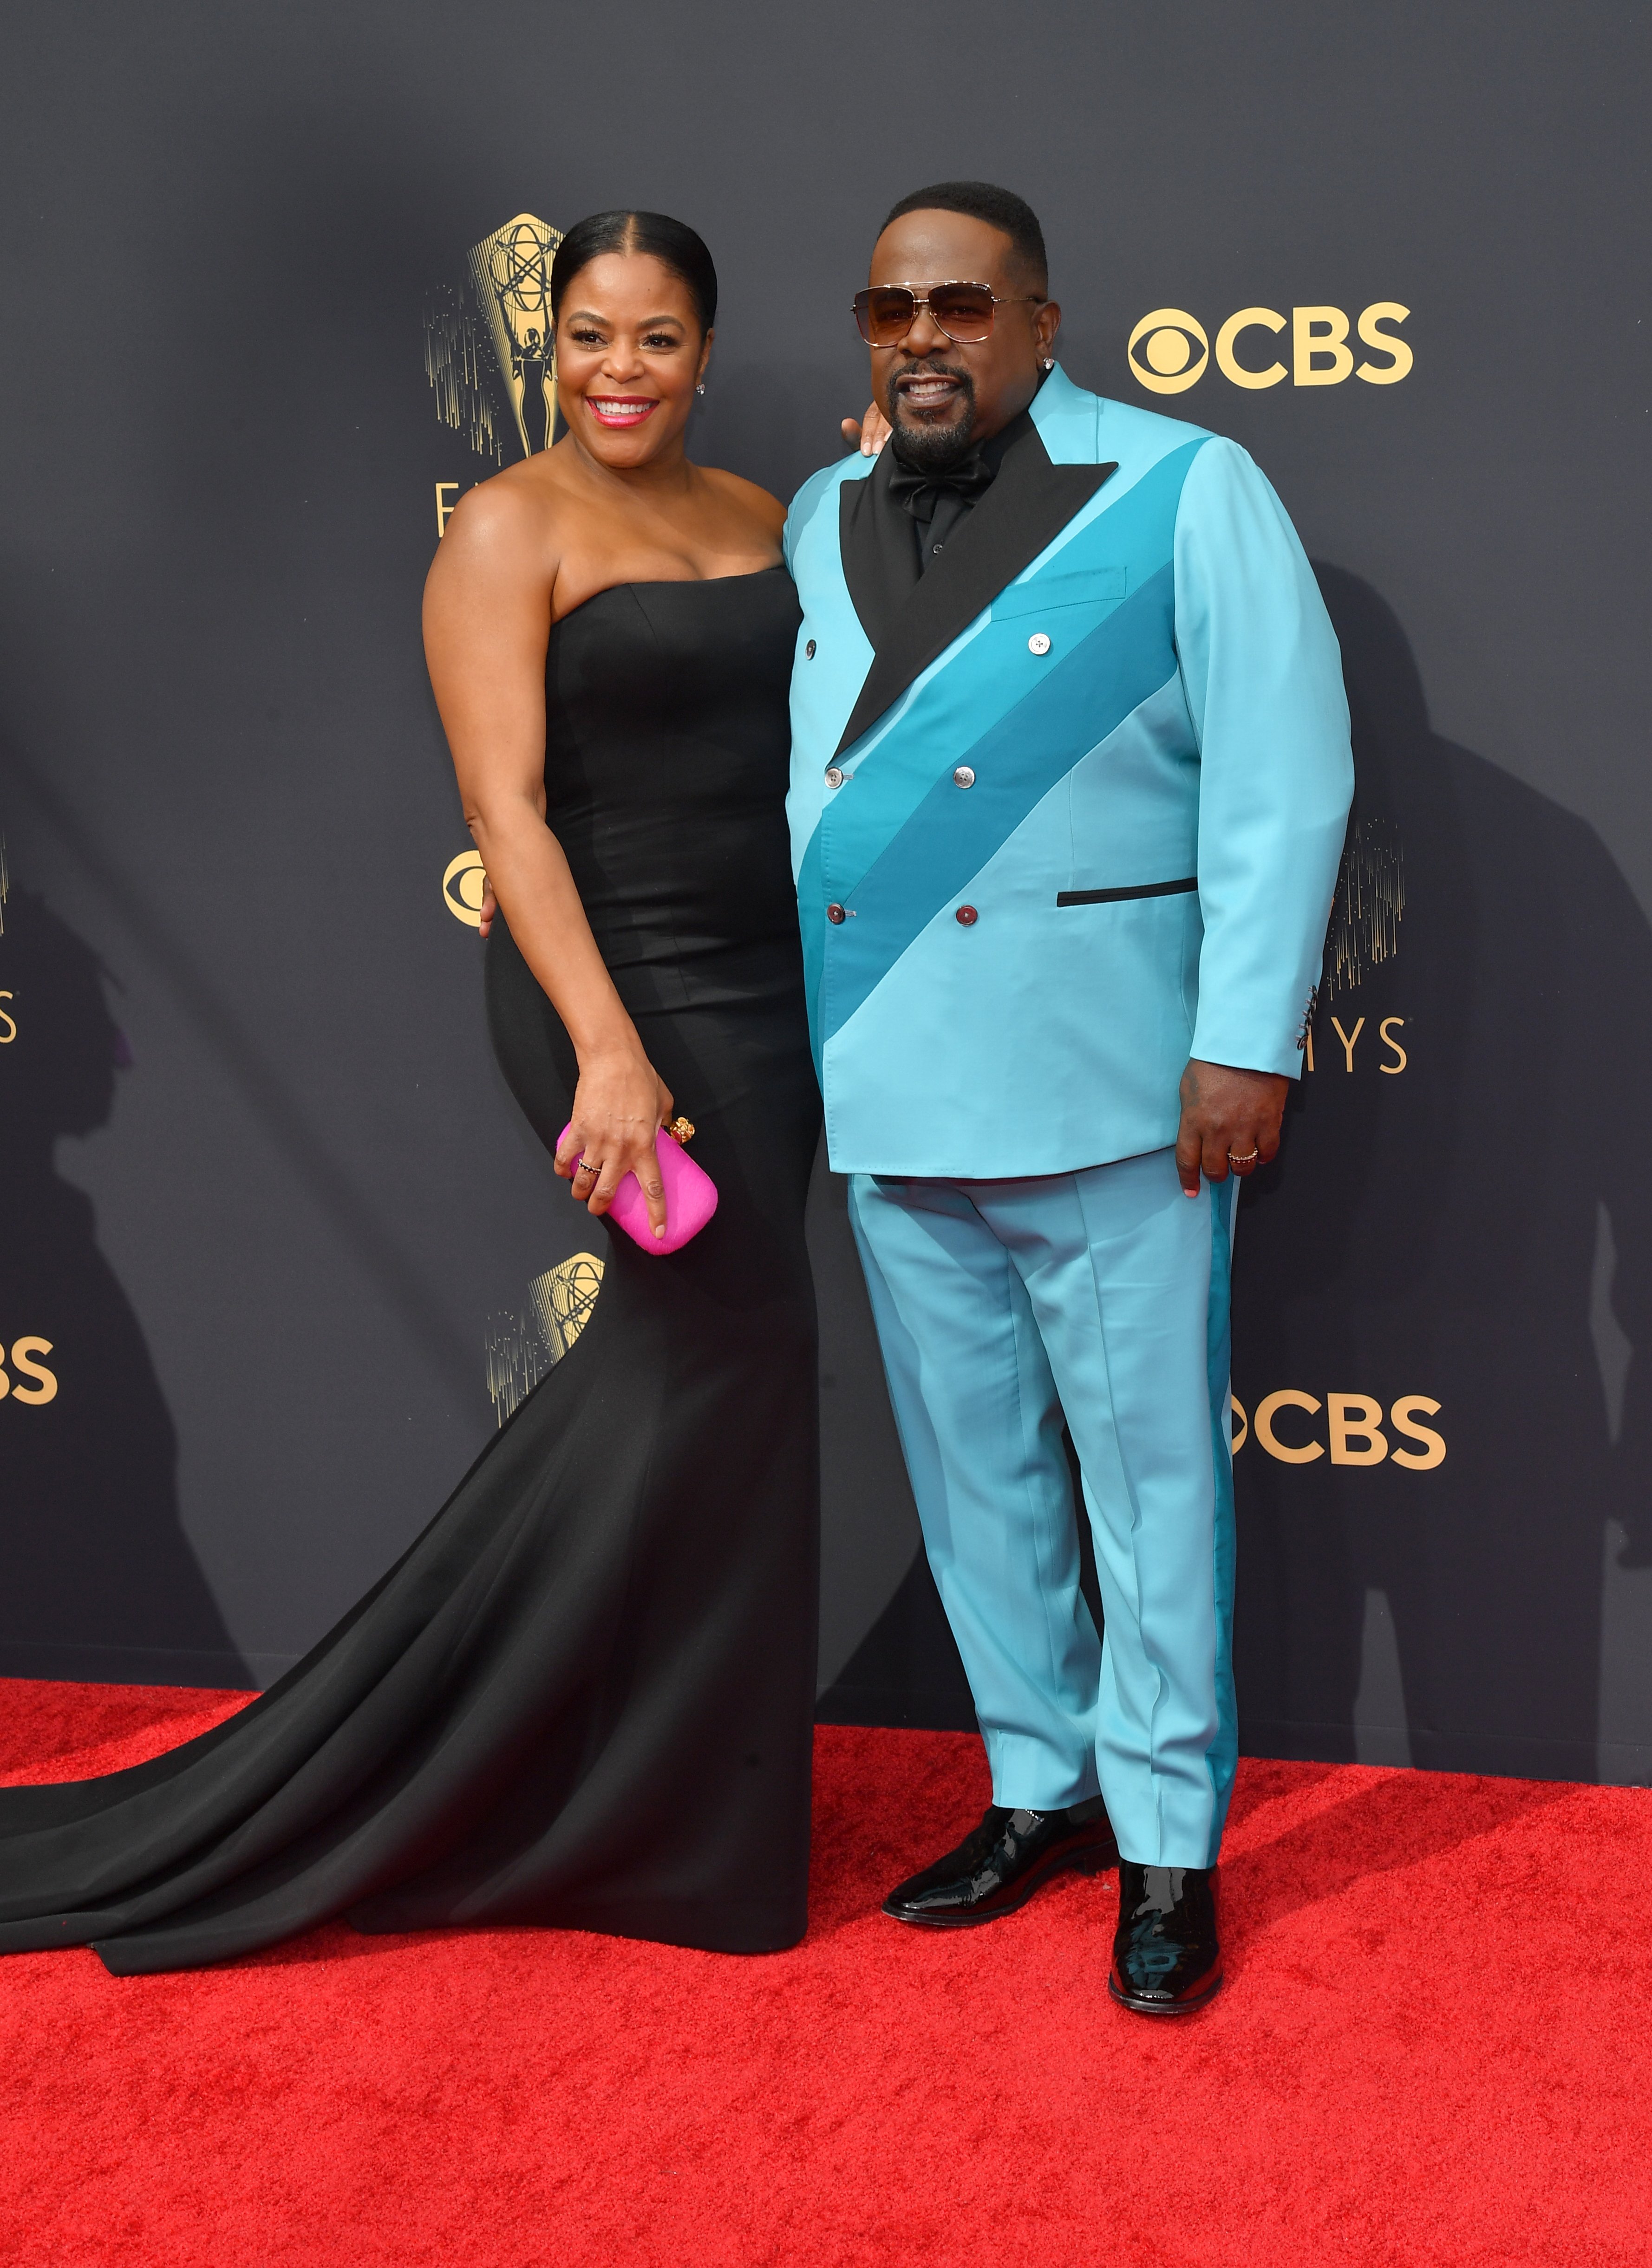 Lorna Wells and Cedric the Entertainer at the Primetime Emmy Awards in Los Angeles, California, on September 19, 2021. | Source: Getty Images